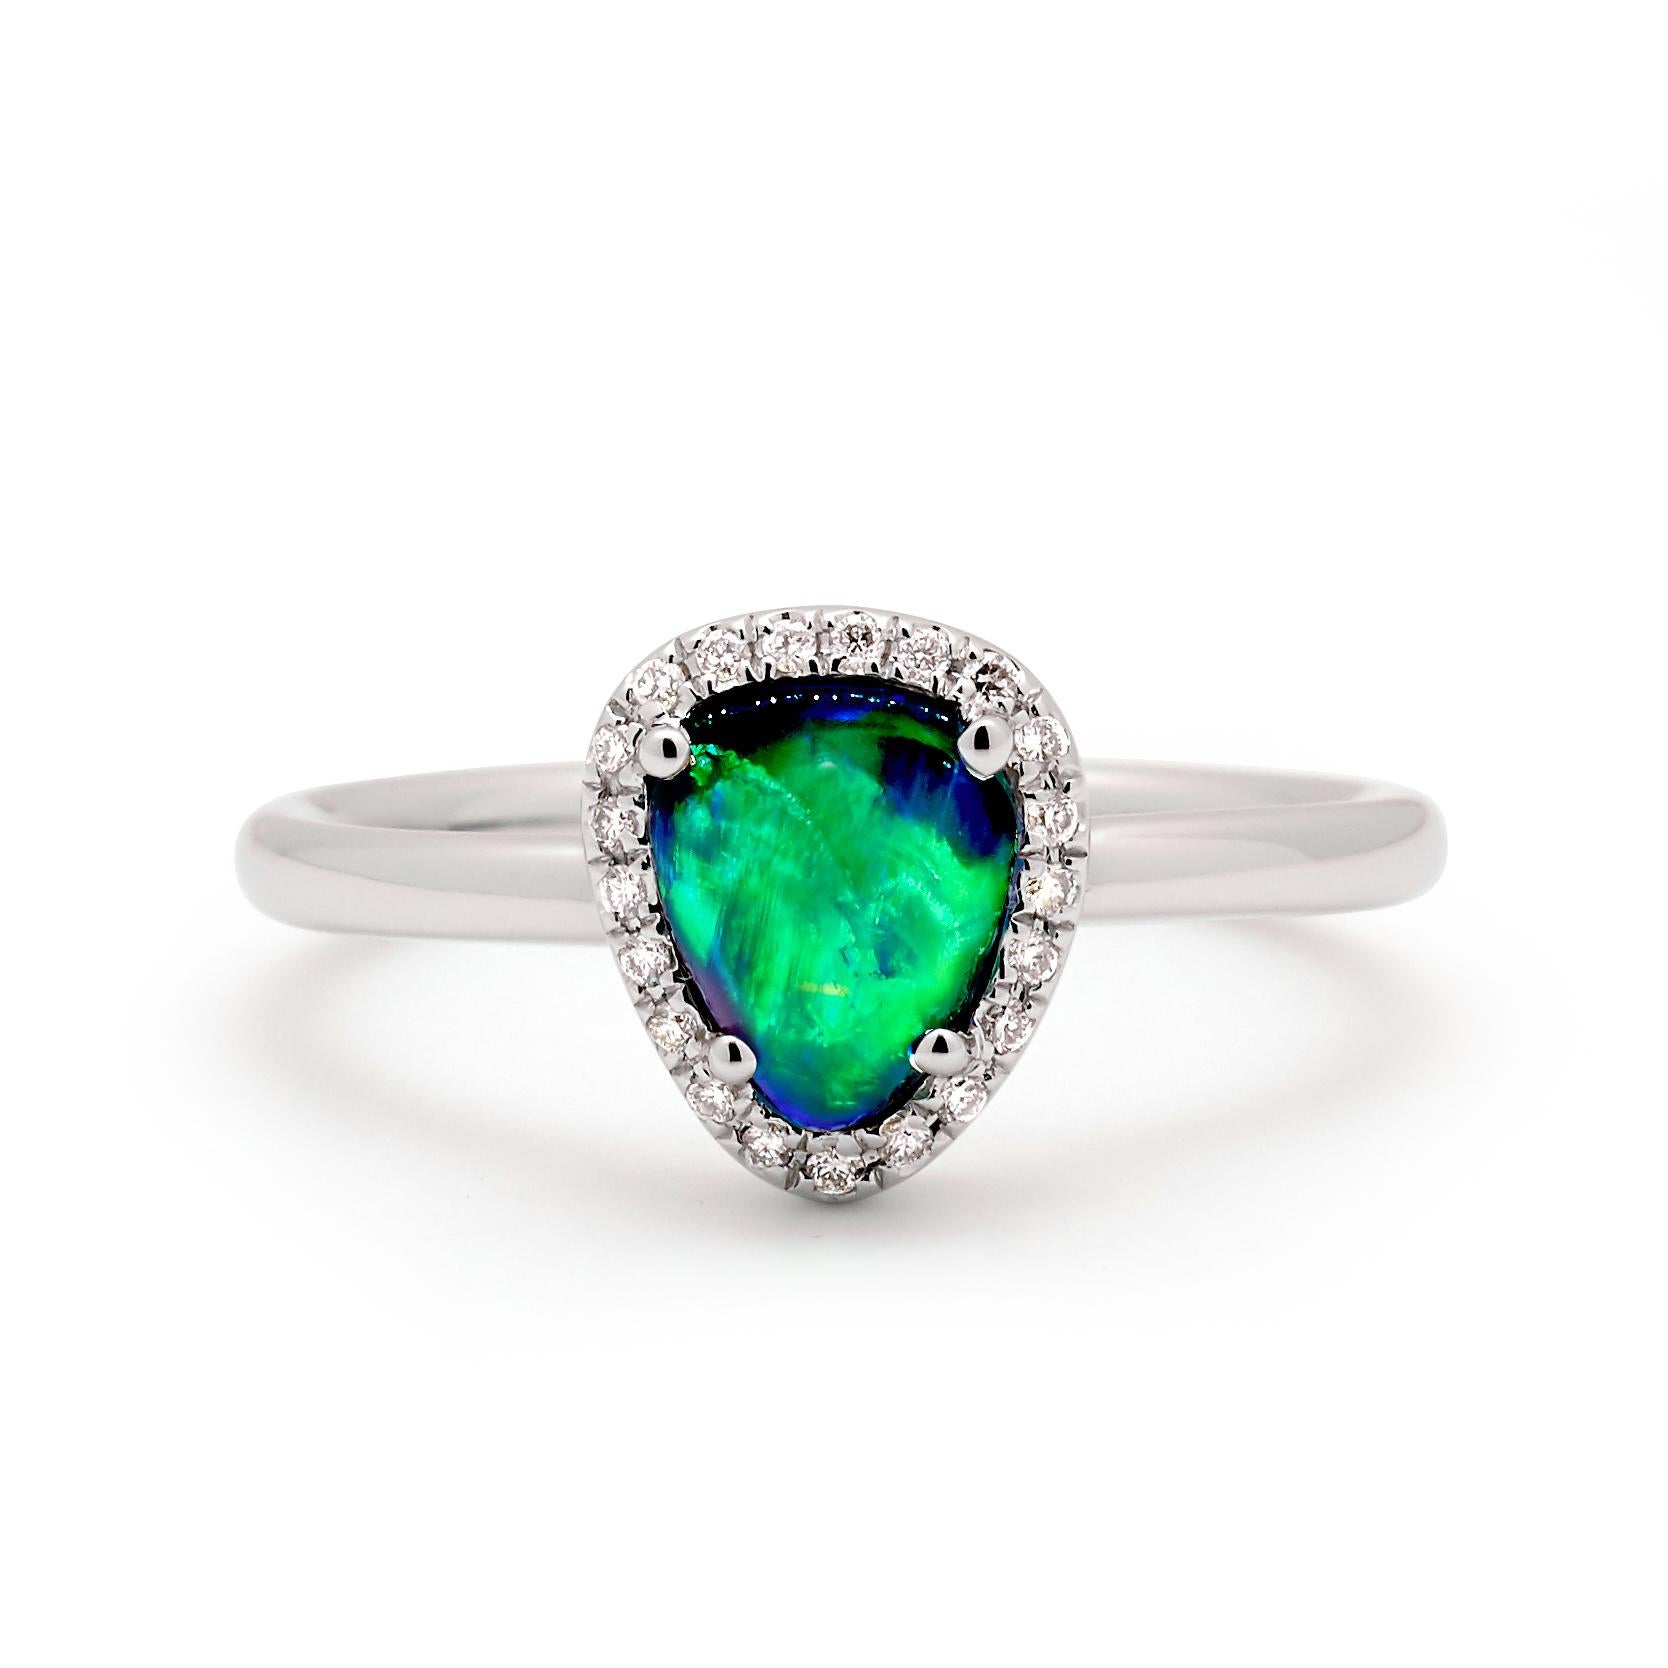 A delightful black opal (1.23ct) with astounding colour-play is the heart of “Marta” opal ring. The 18K white gold setting with its frame of sparkling diamonds make this a classic yet unusual engagement ring. Utterly irresistible – she’s bound to